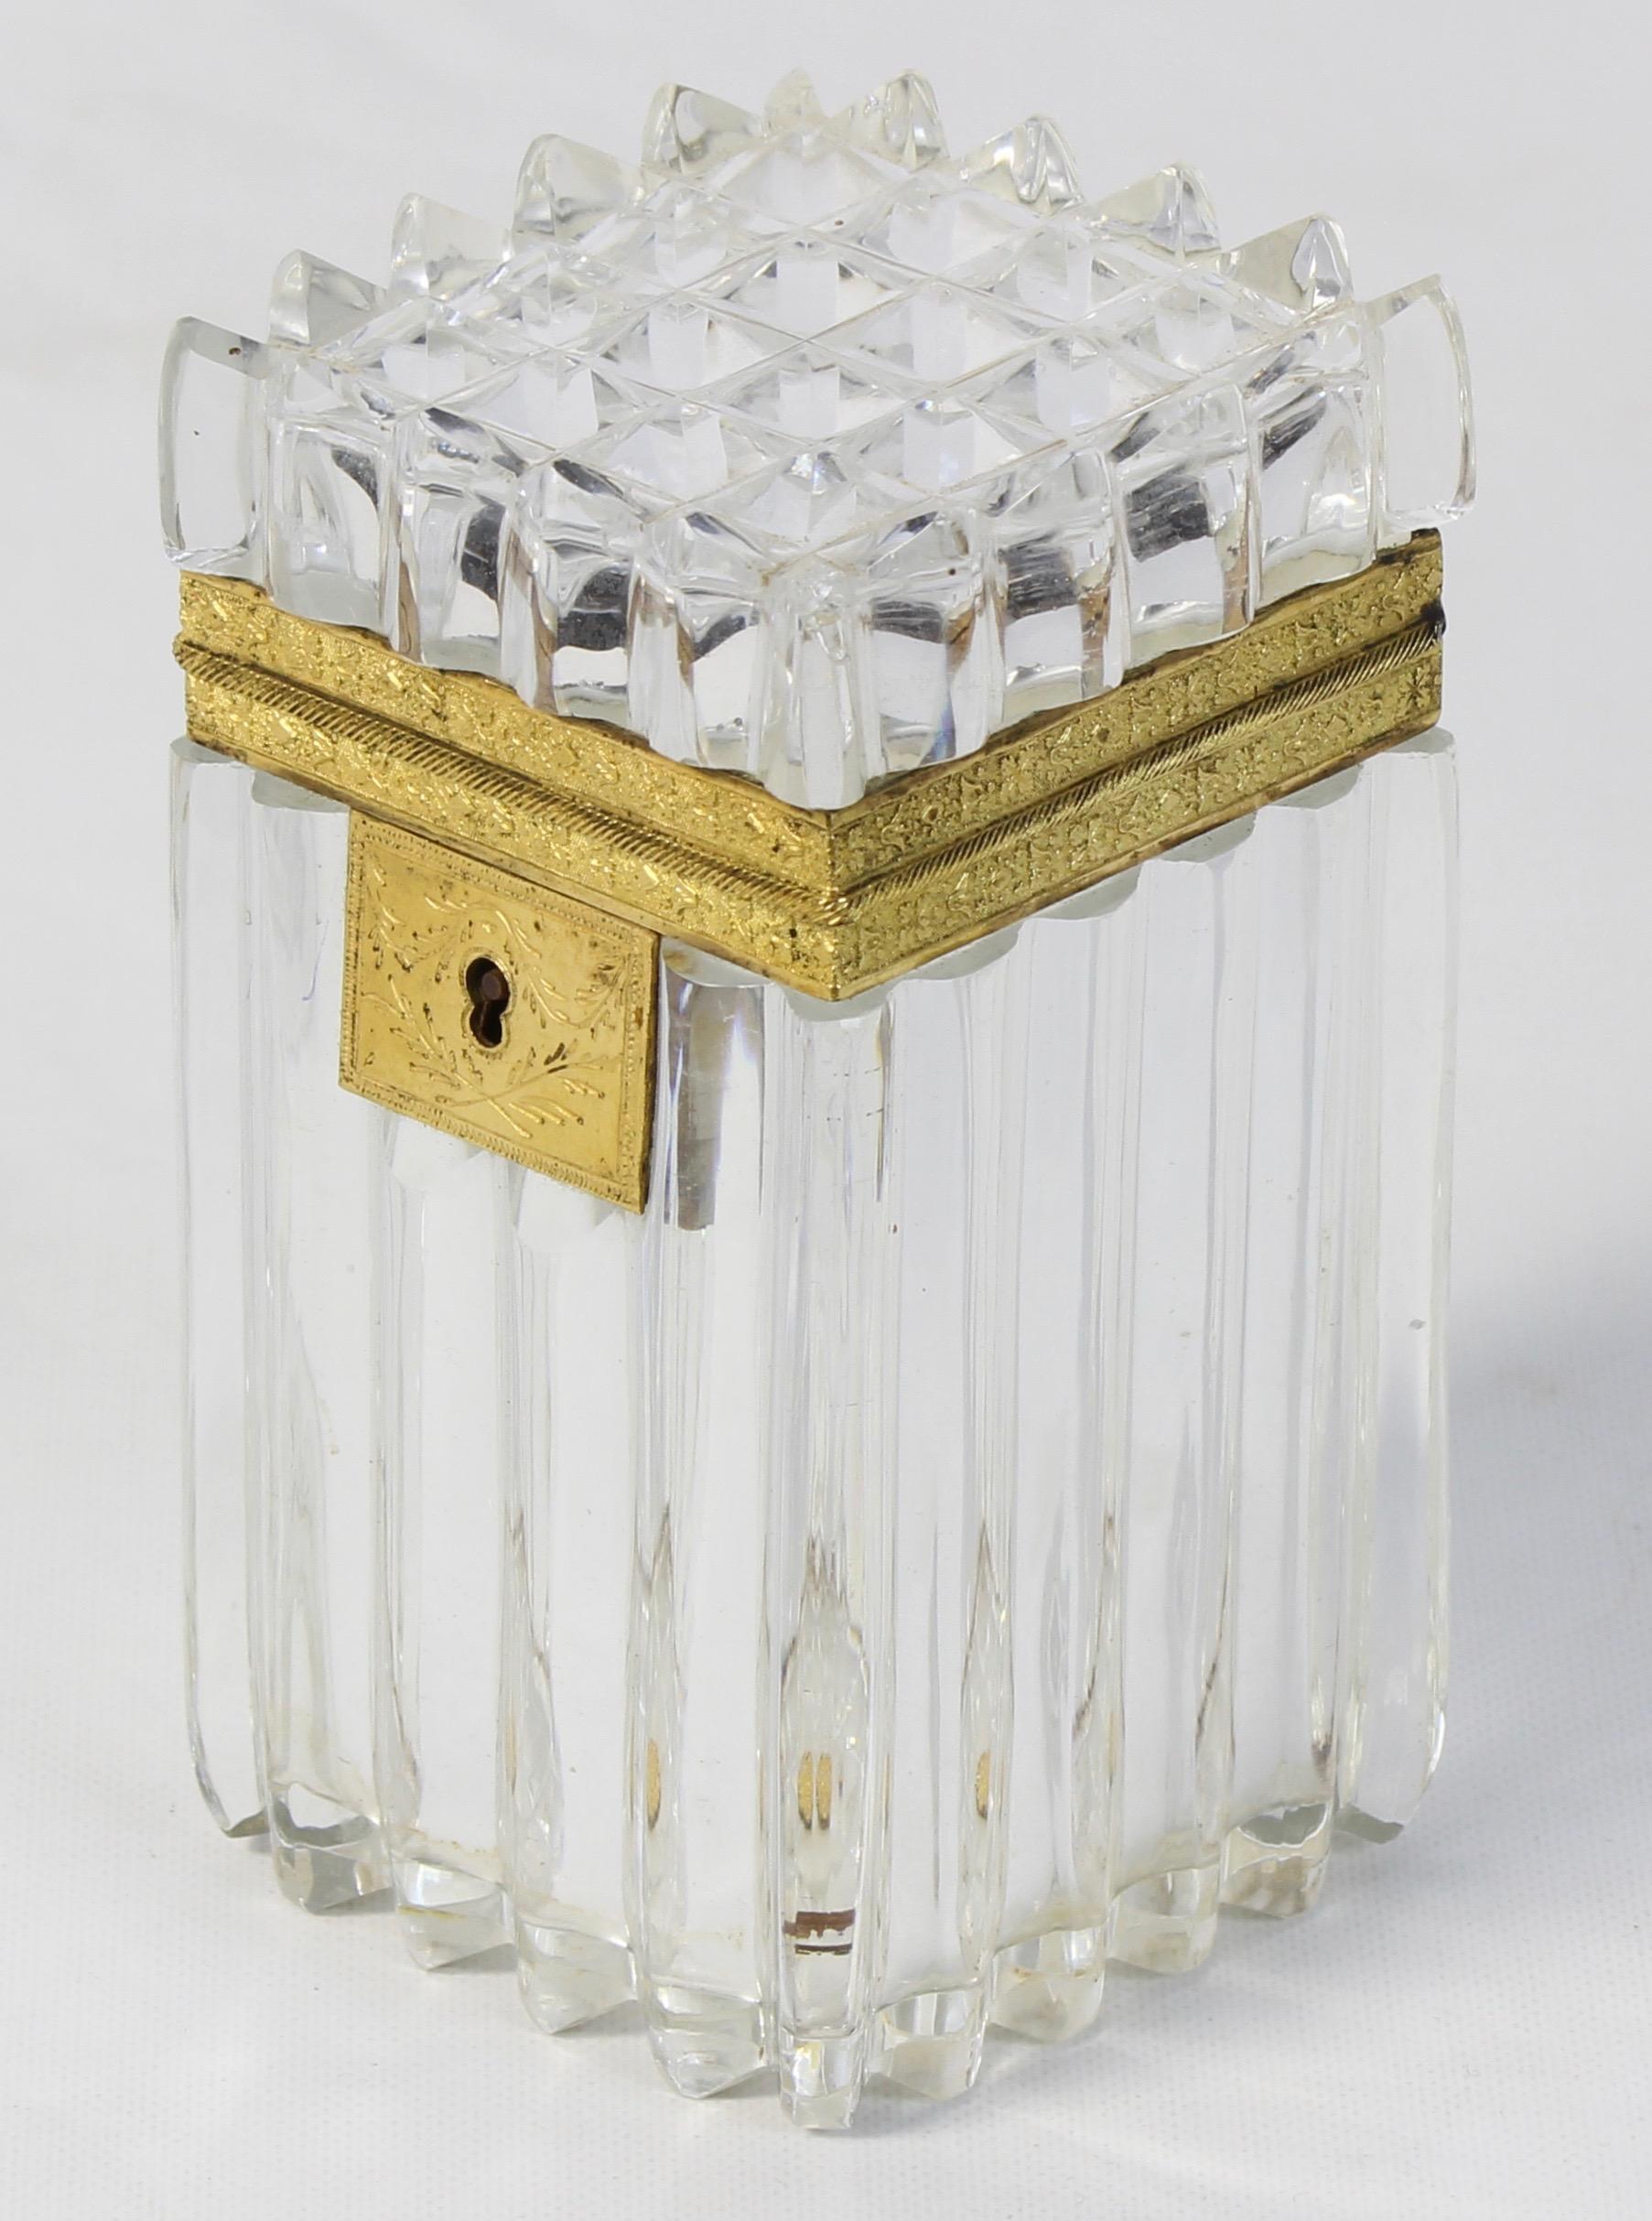 A late 19th century French cut crystal lidded box with gilt bronze accents and original key.